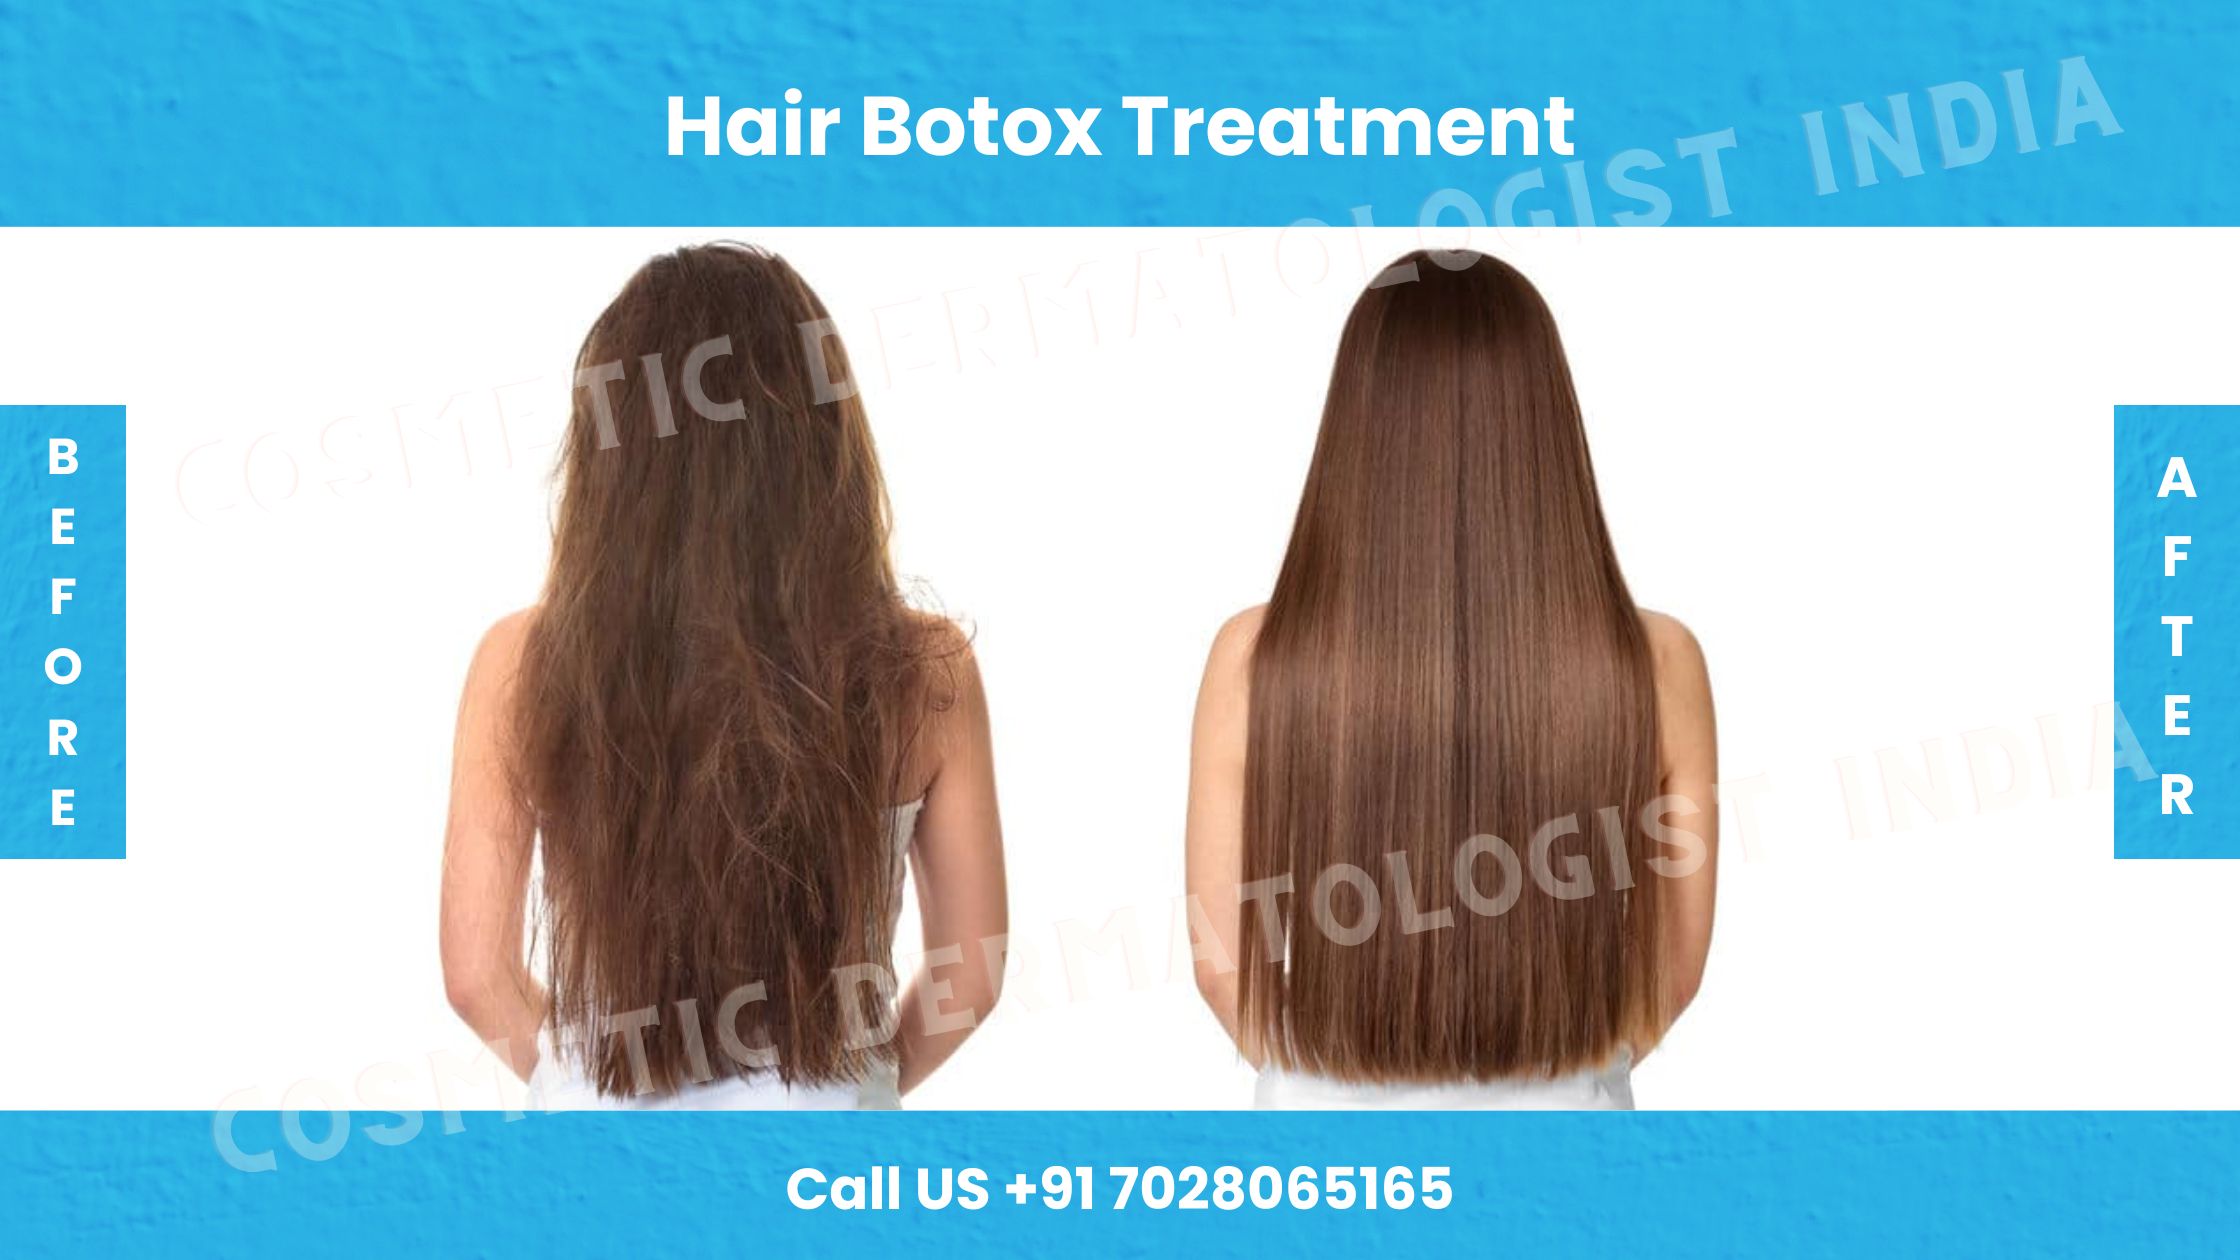 Before and After images of hair botox treatment